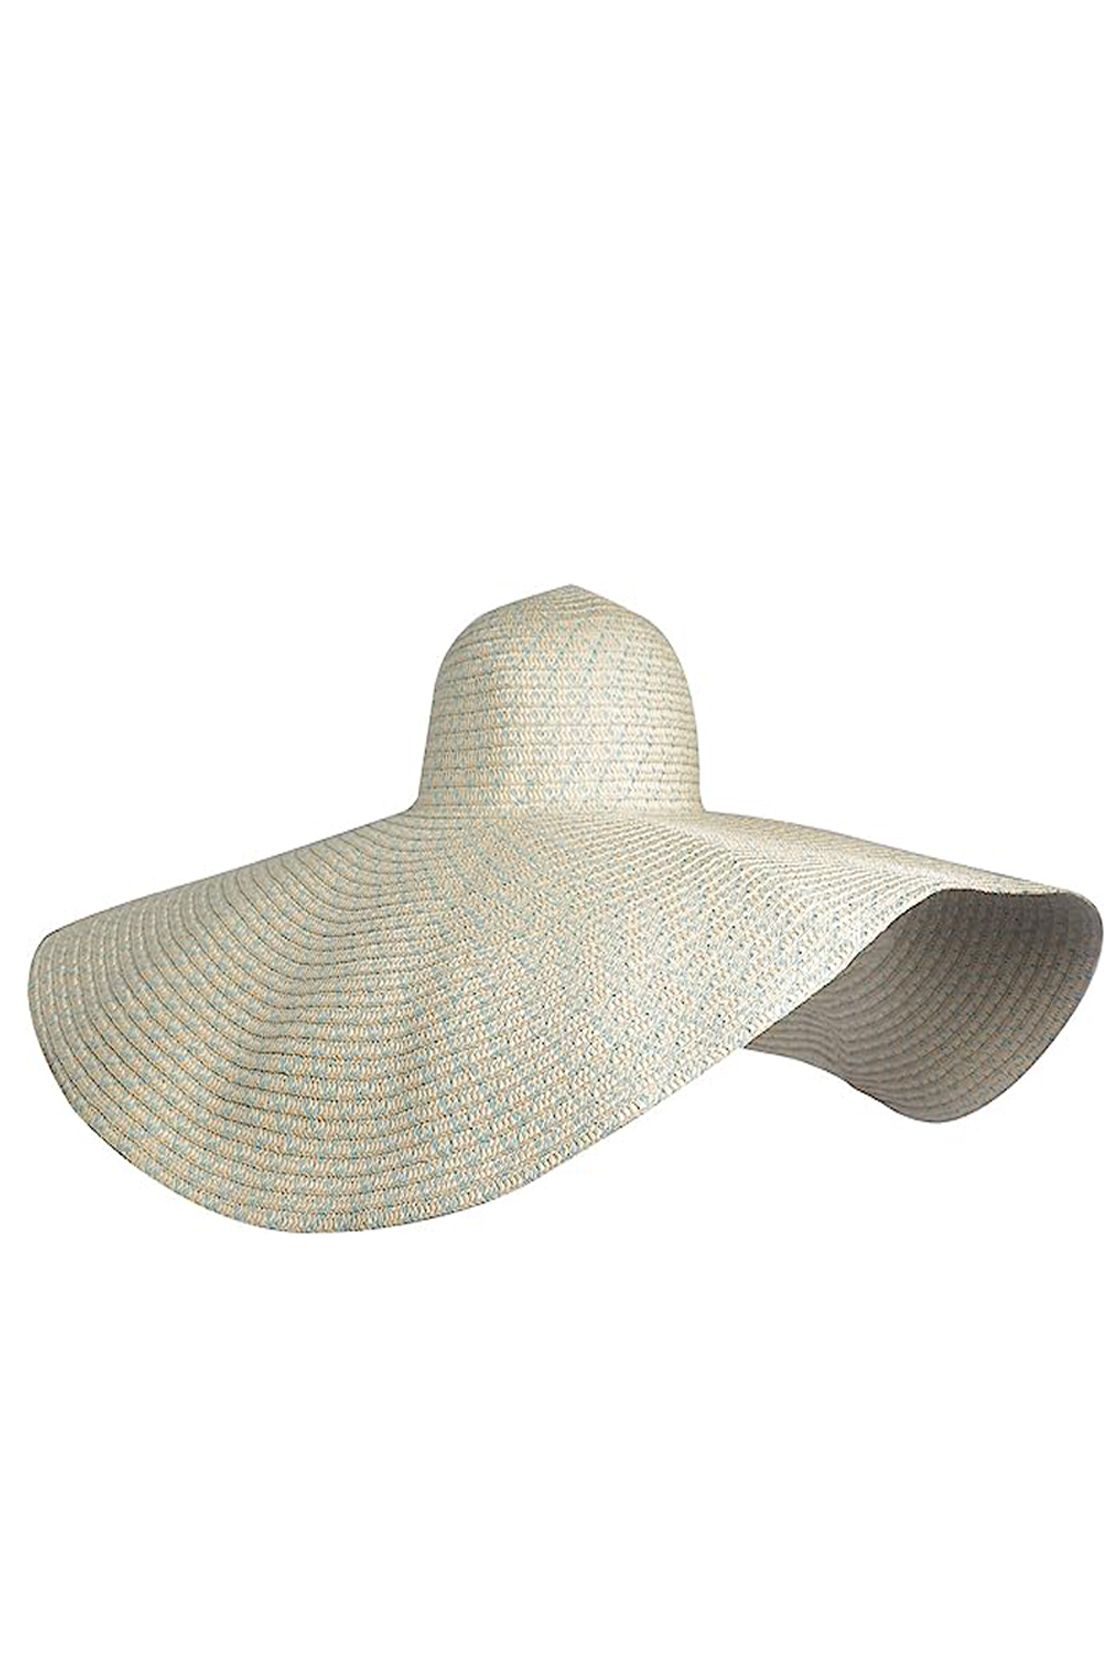 A
Floppy Sun Hat For Some Stylish Protection From The Sun